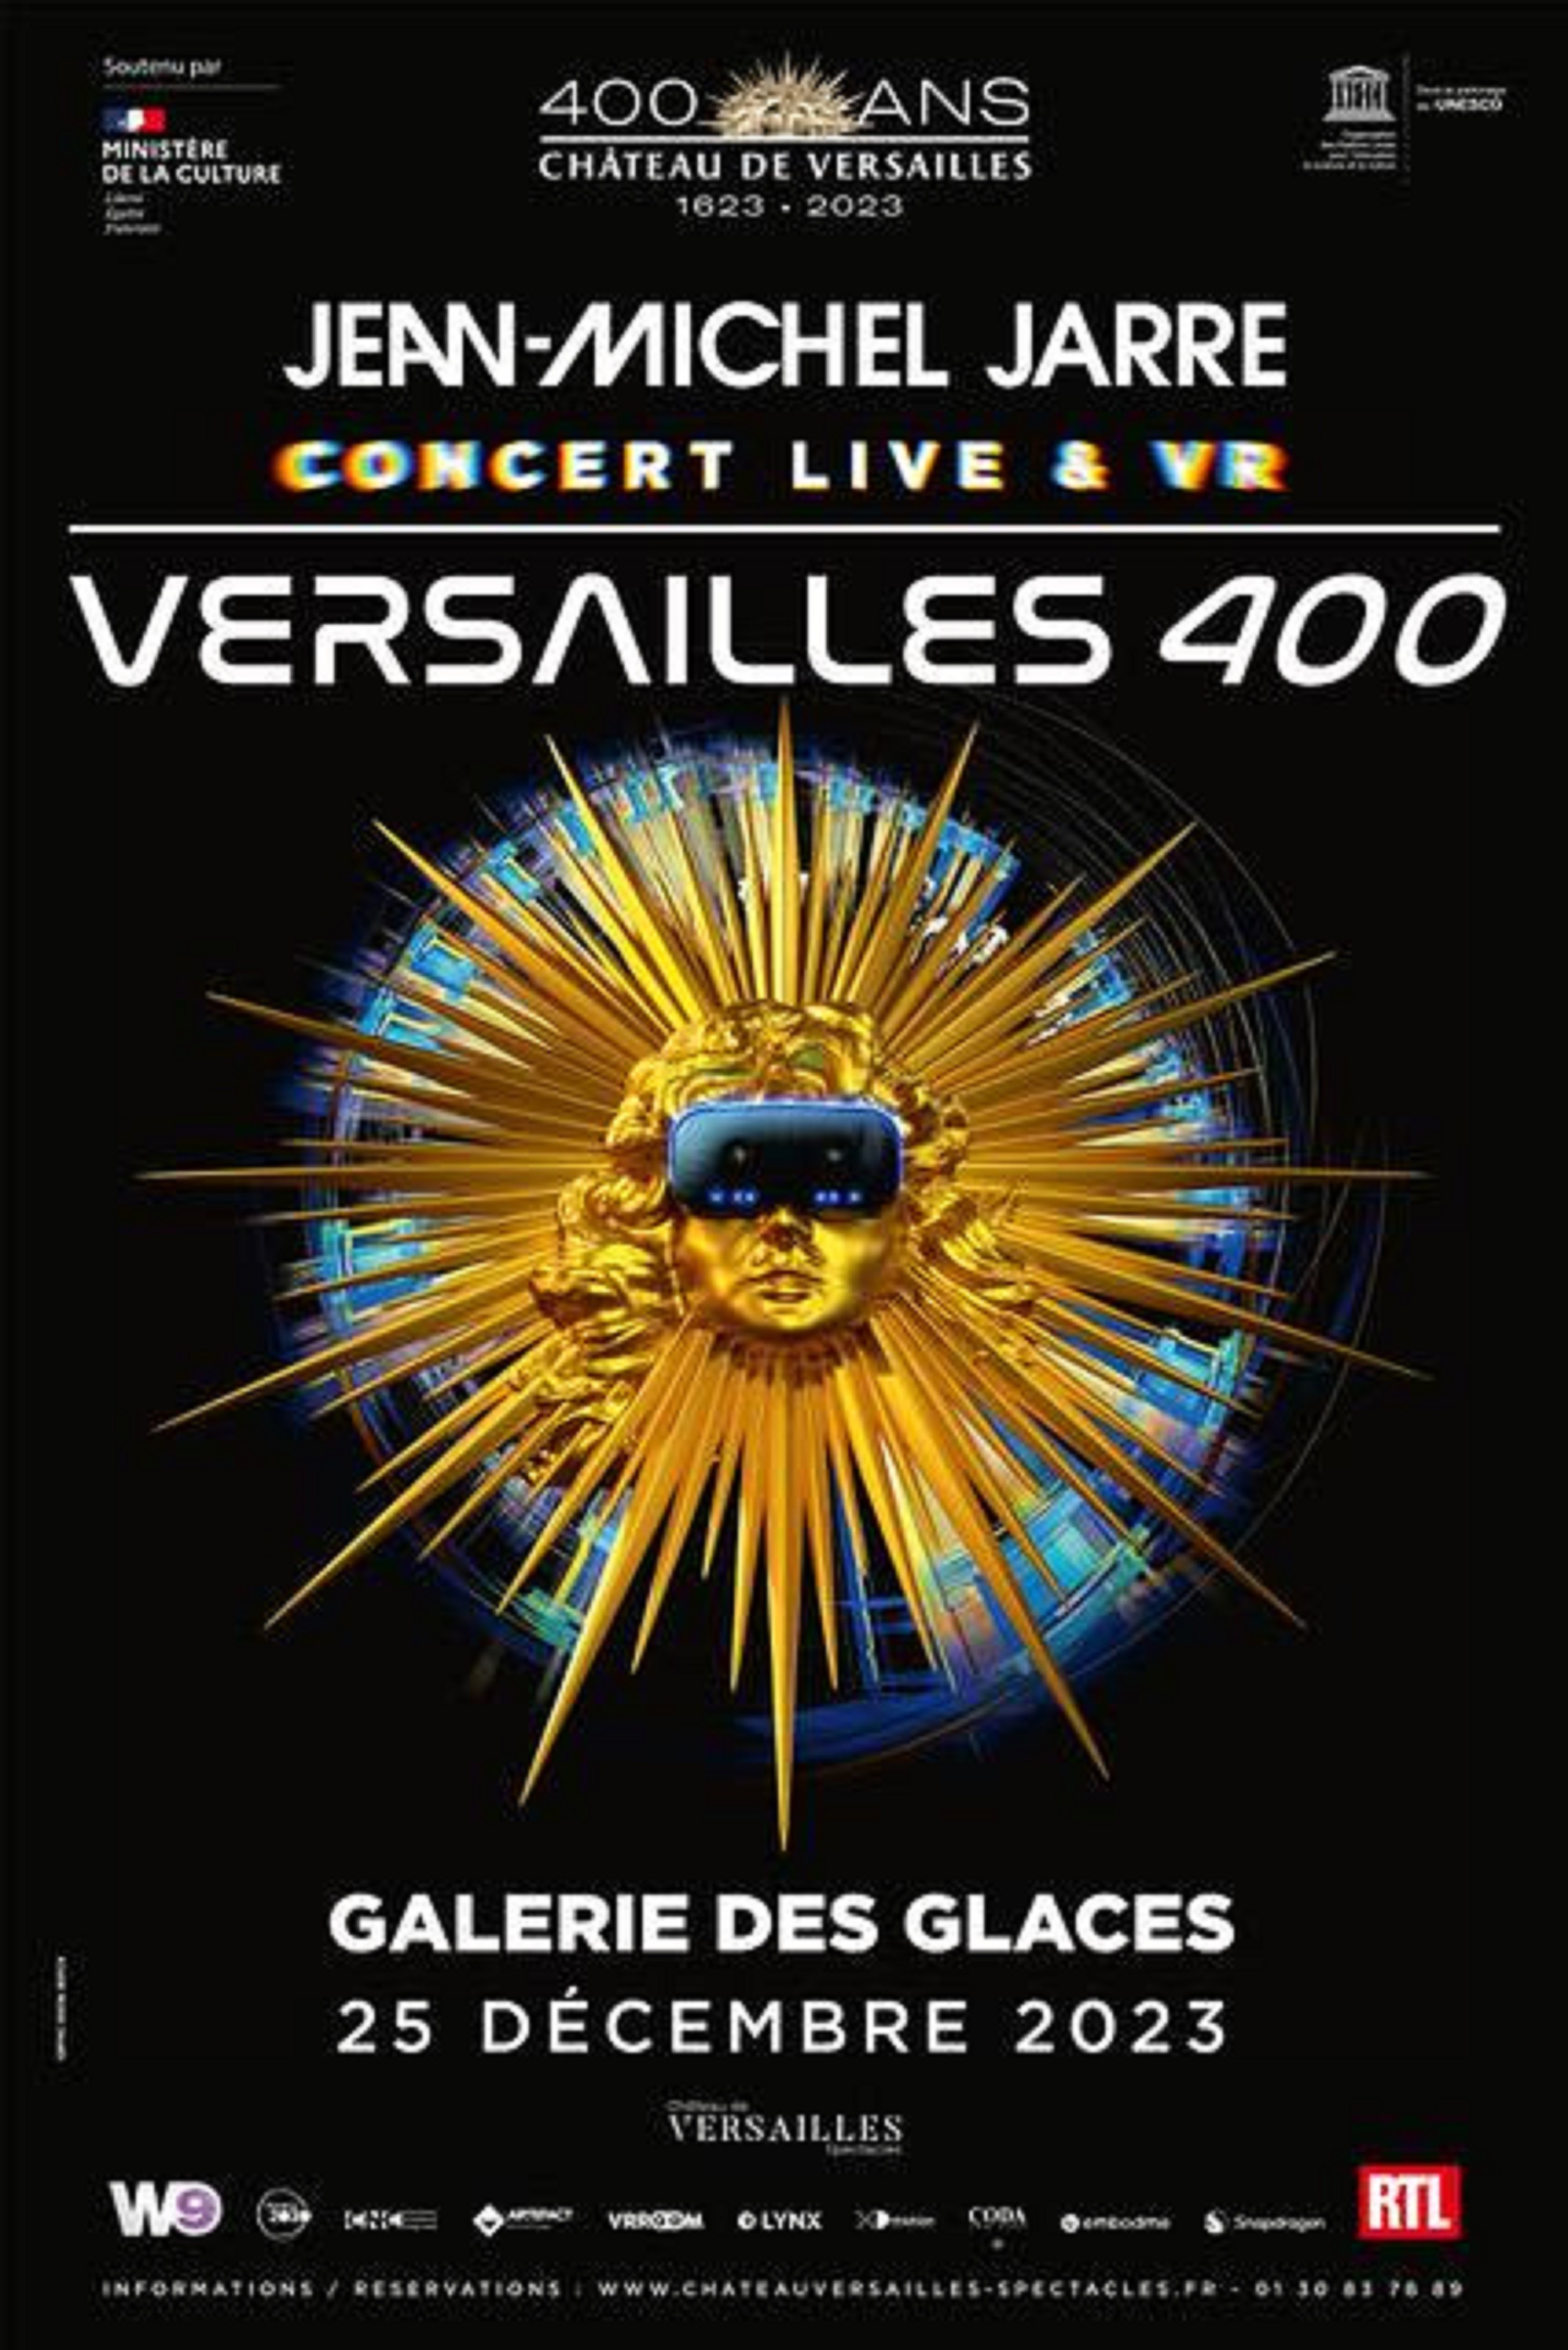 Versailles 400: An Innovative Mixed-Reality Concert By Jean-Michel Jarre At The Château De Versailles On Christmas Day - December 25, 2023